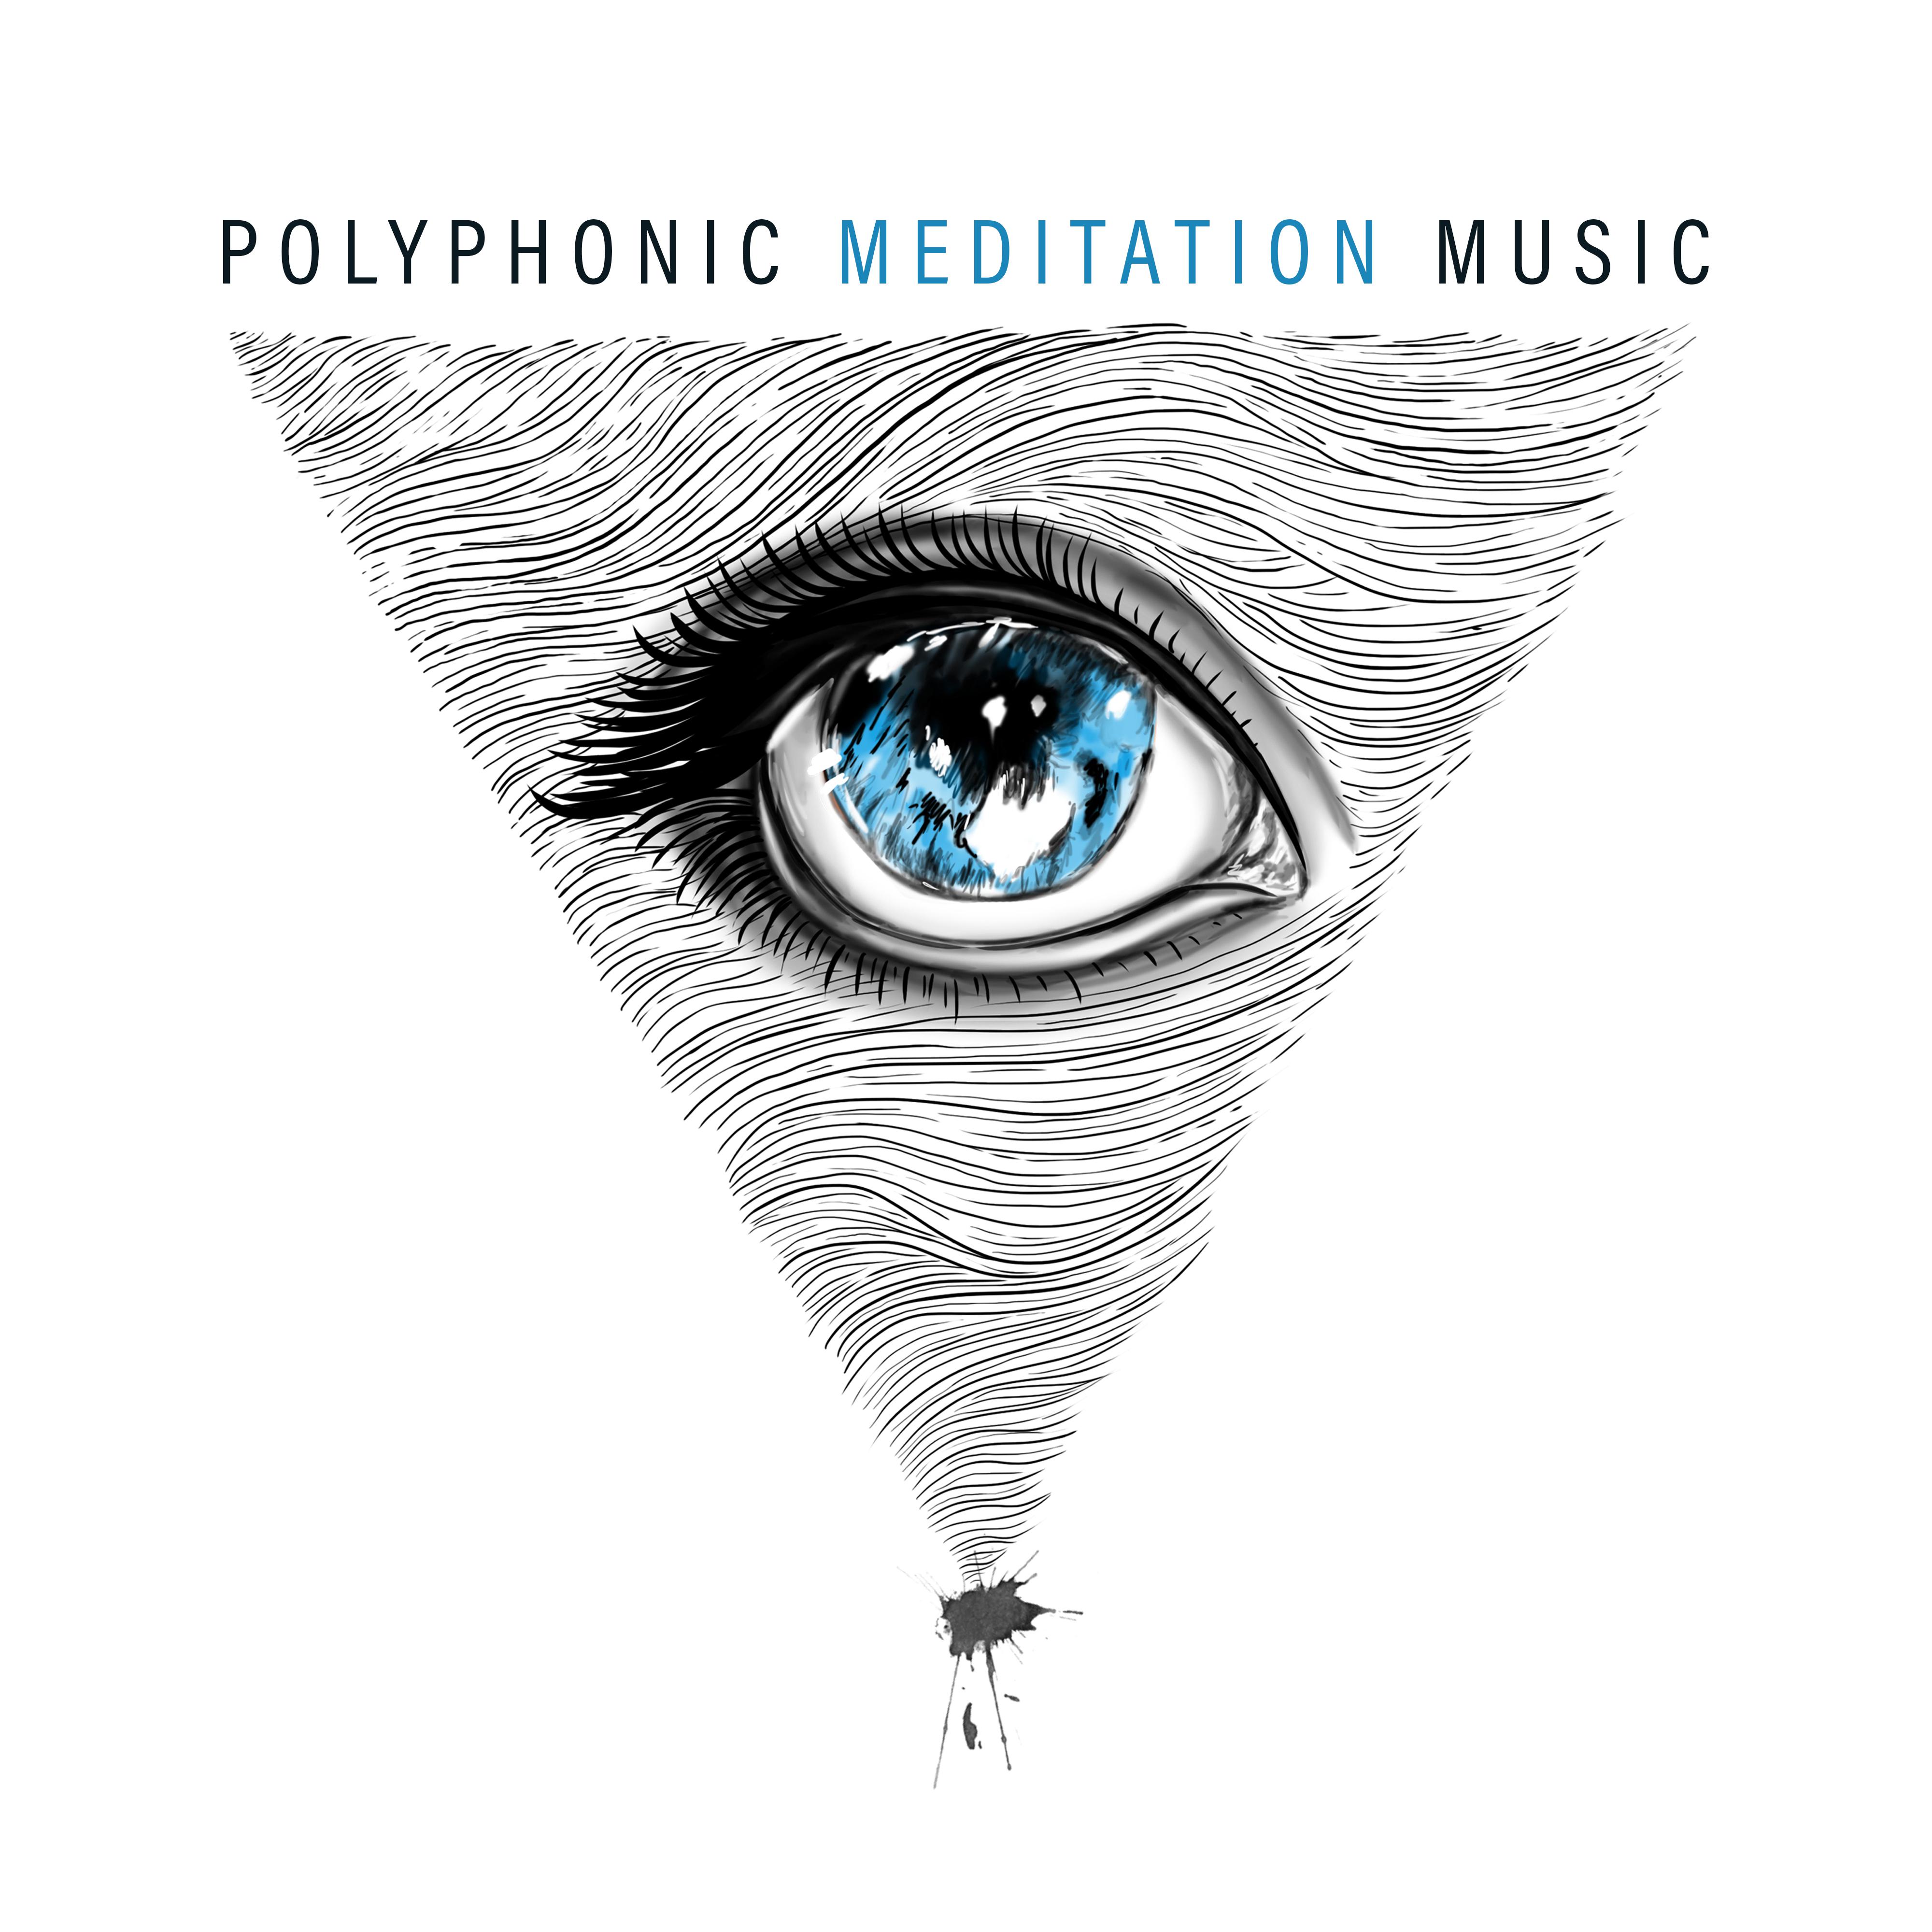 Polyphonic Meditation Music - Excellent for All Buddhist Meditation and Yoga Exercises